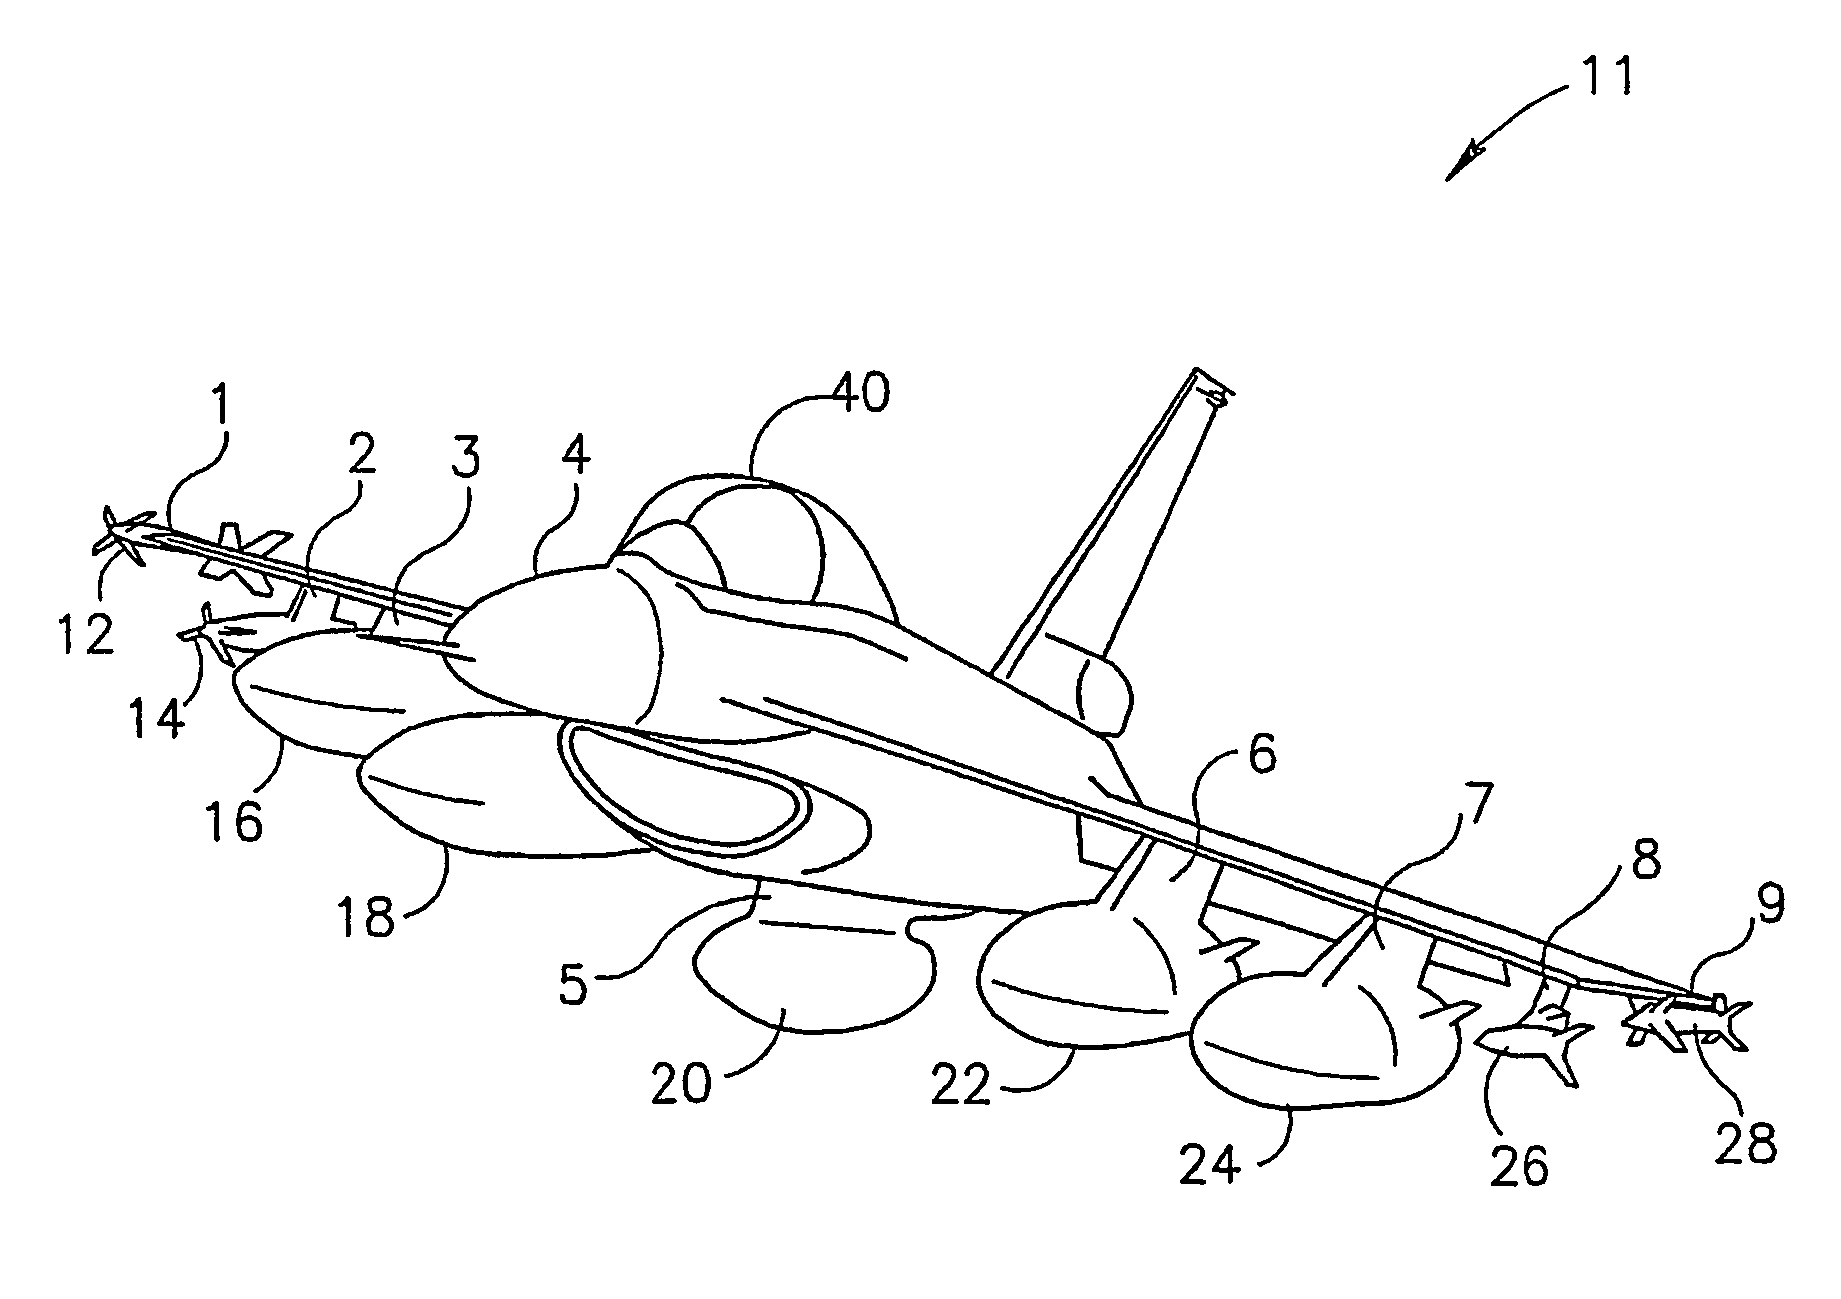 System and method for enhancing the payload capacity, carriage efficiency, and adaptive flexibility of external stores mounted on an aerial vehicle